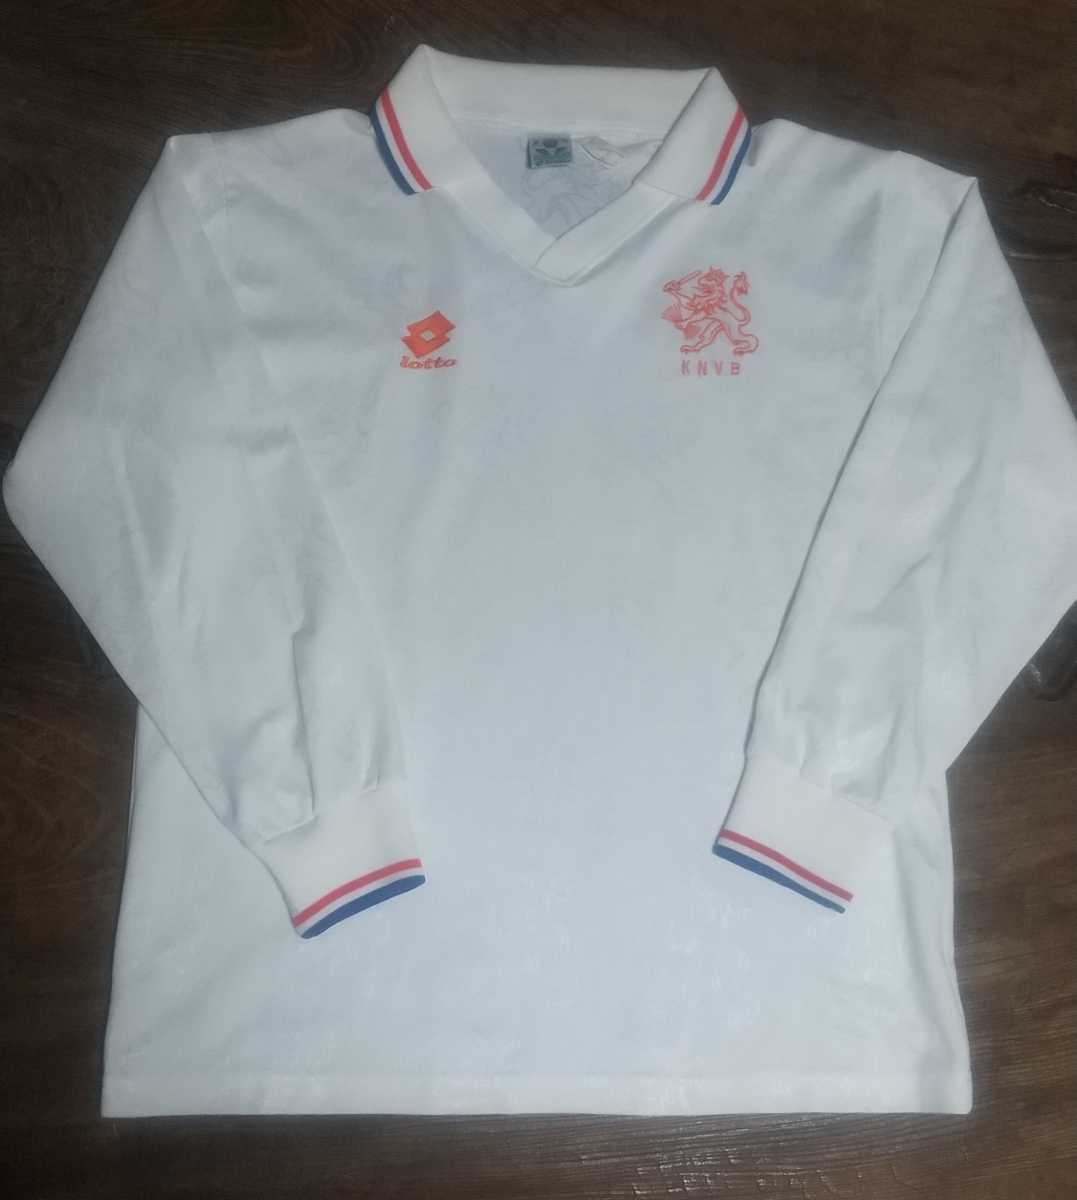  price cut negotiations 1992-1994 Holland representative long sleeve Lotto MADE IN ITALY inspection )1993 92 94 KNVB HOLLAND NETHERLANDS L/S WORLD CUP World Cup Y2K